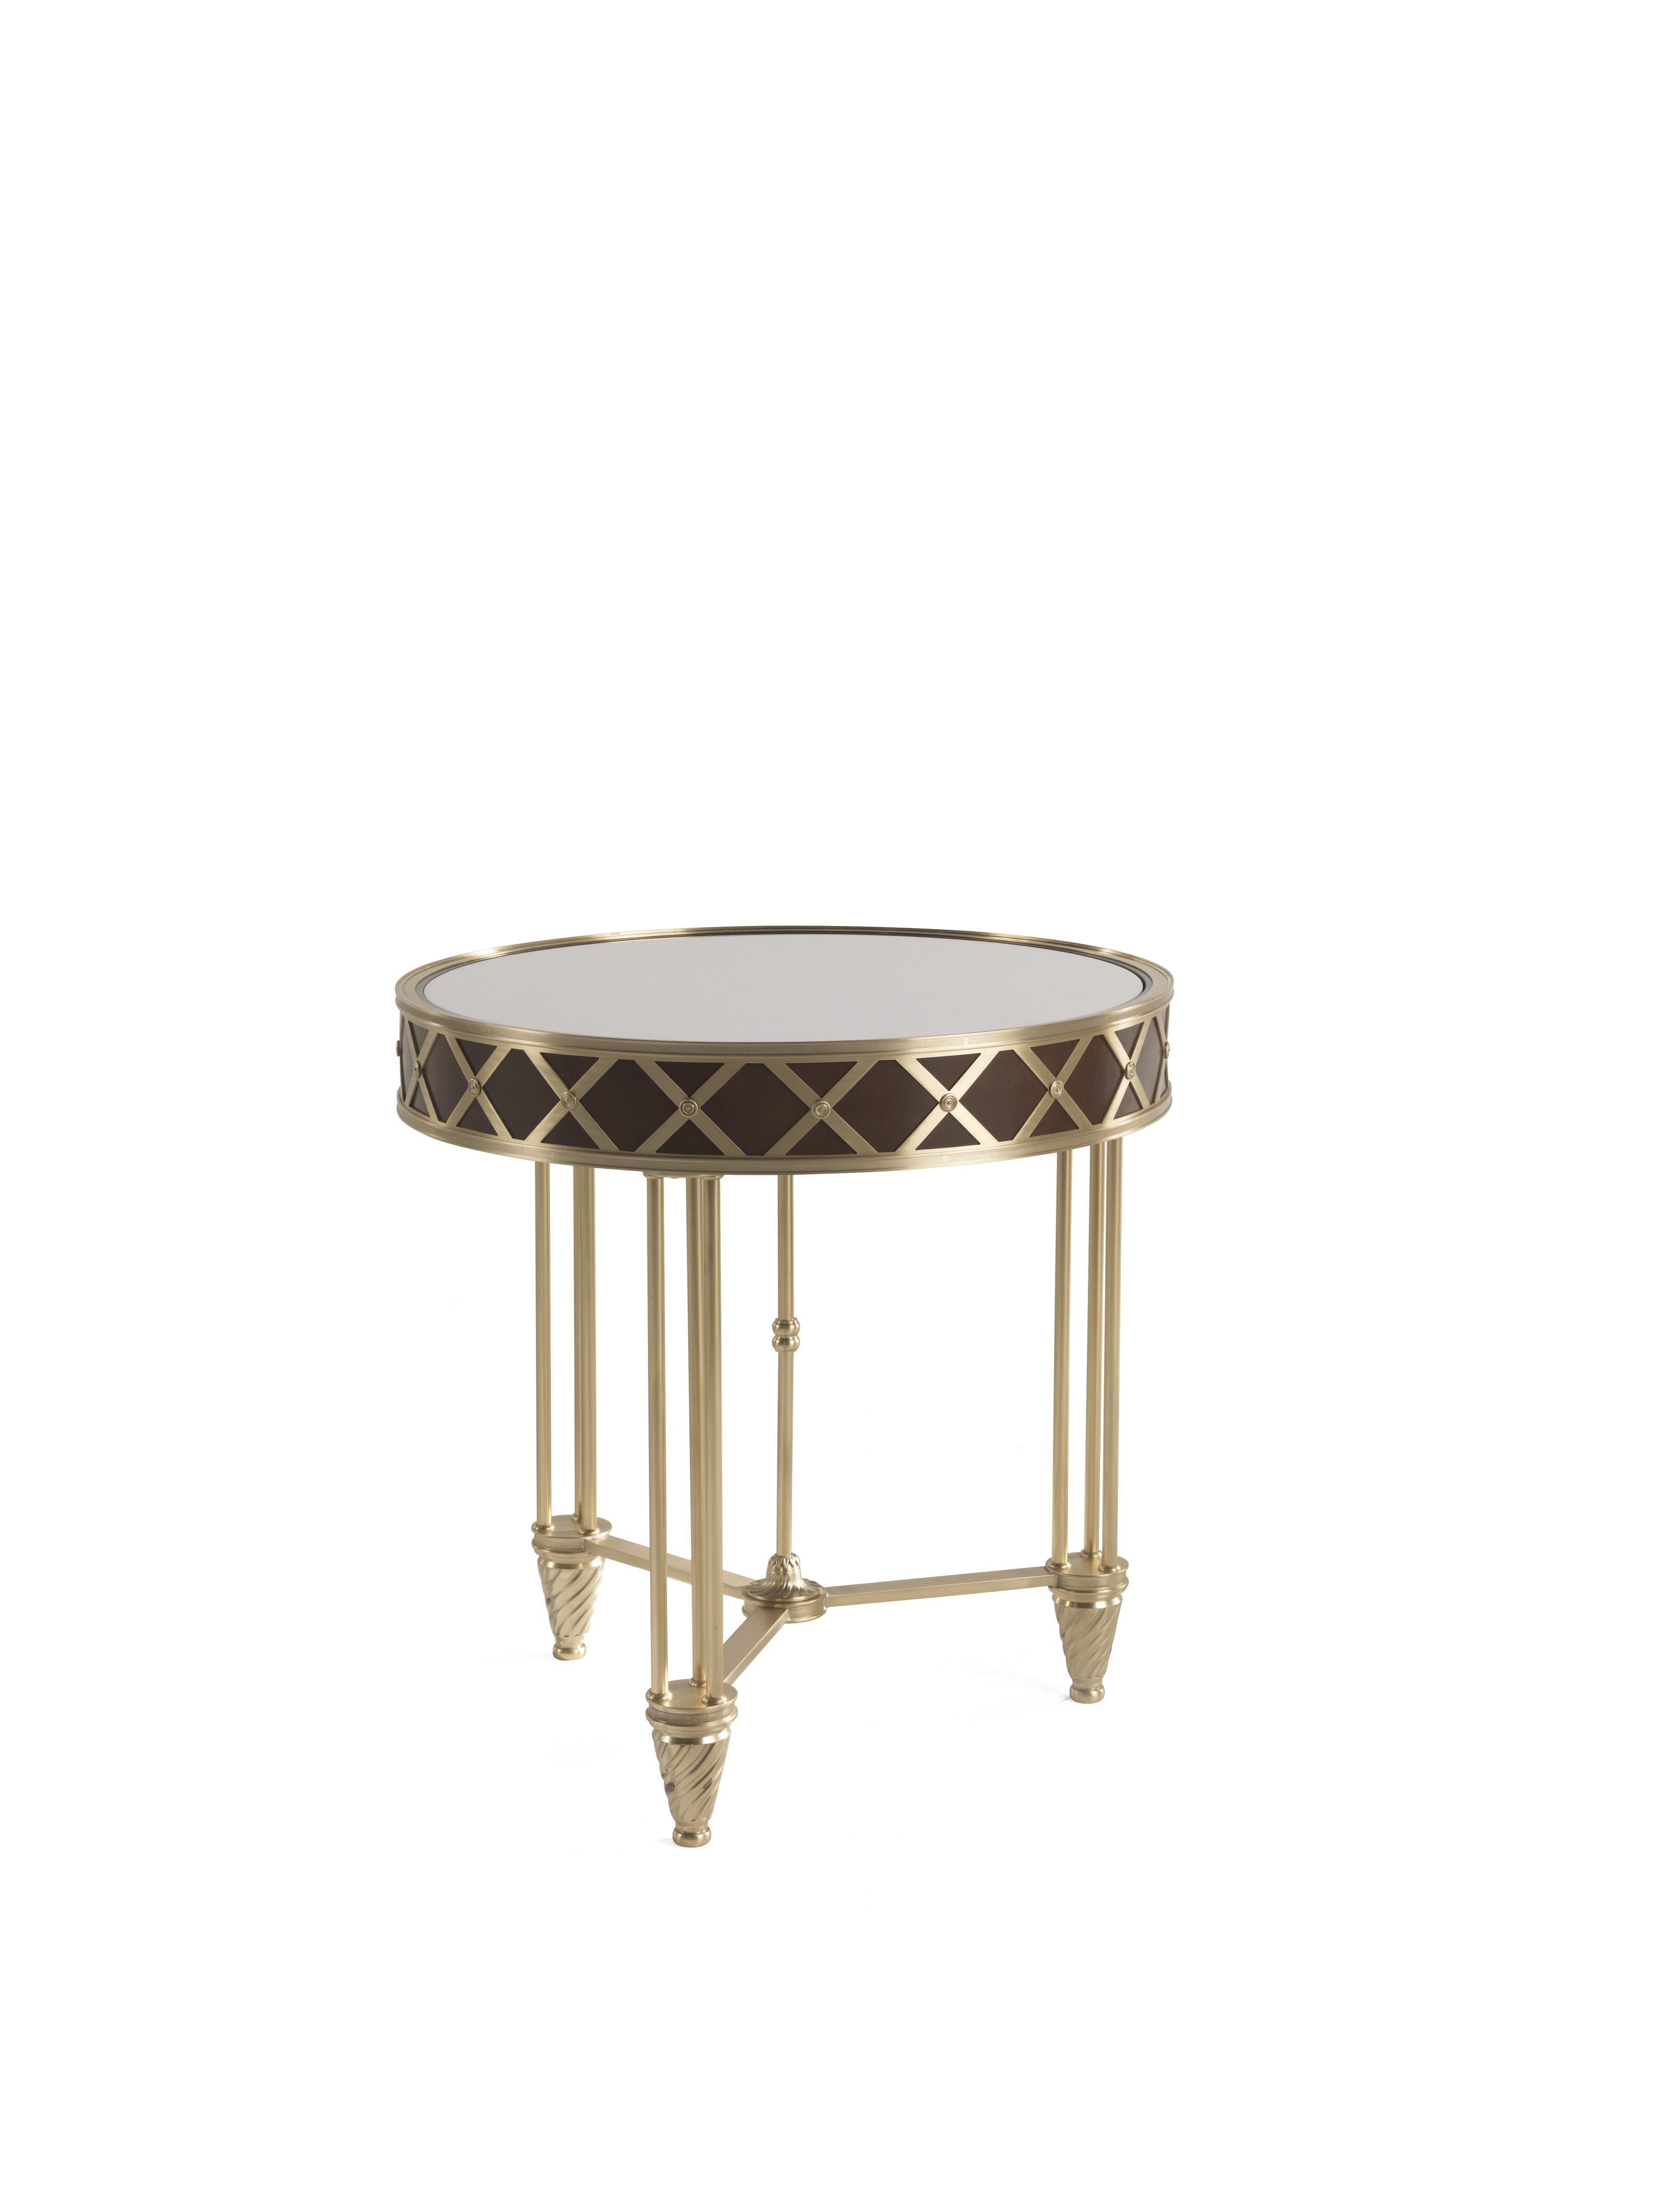 A revisited Art Deco style for Cassis side table. An elegant piece of furniture with a bold character, perfect to be inserted in settings of different styles. The table features a structure in lost-wax cast brass and top in walnut and marble.
Cassis